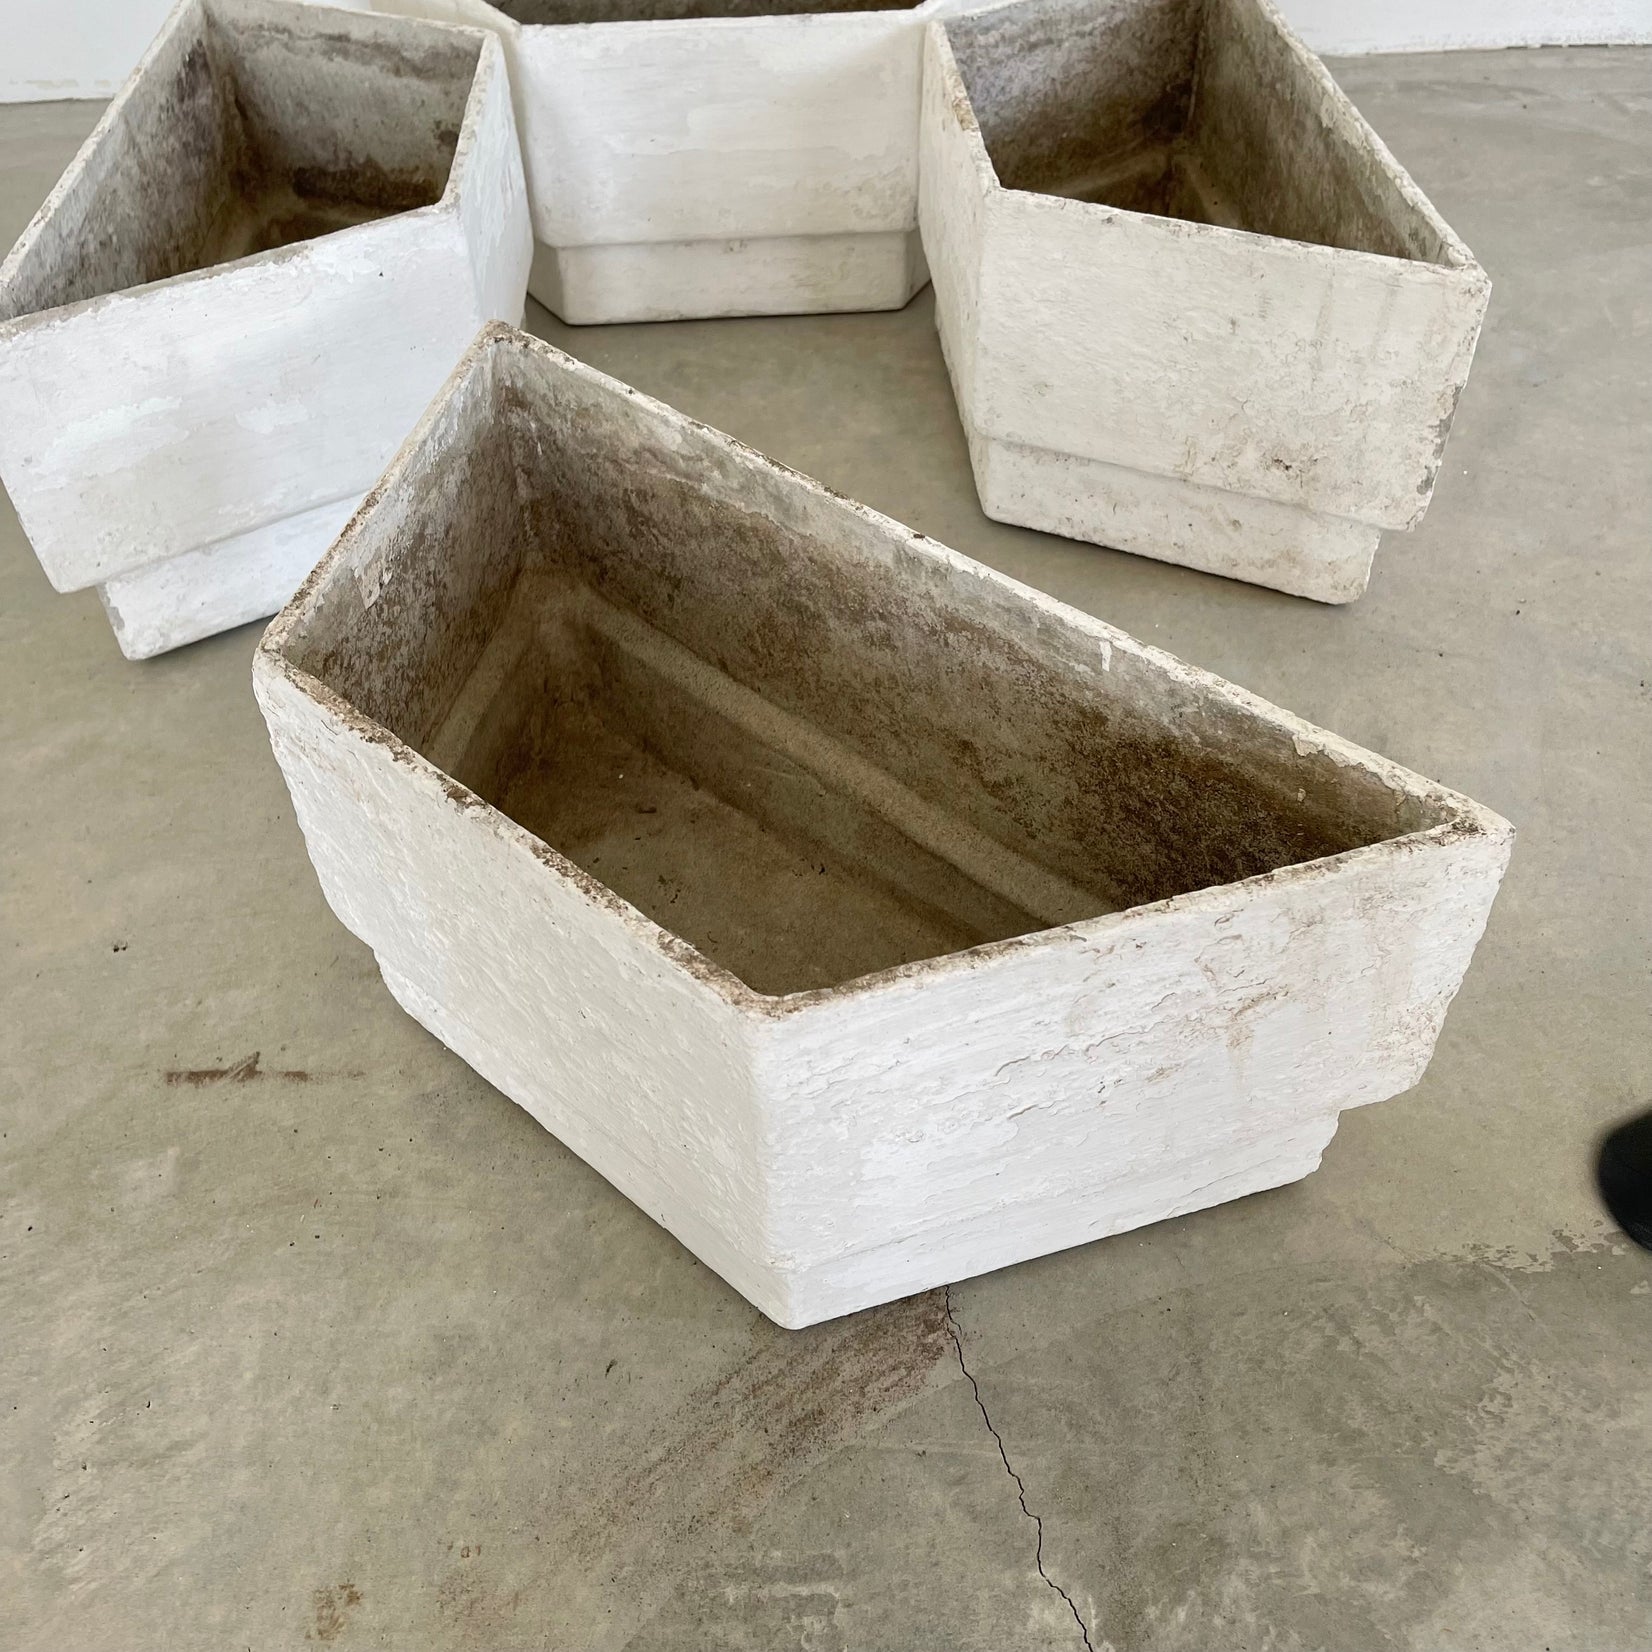 Set of 4 Trapezoid Concrete Planters by Willy Guhl